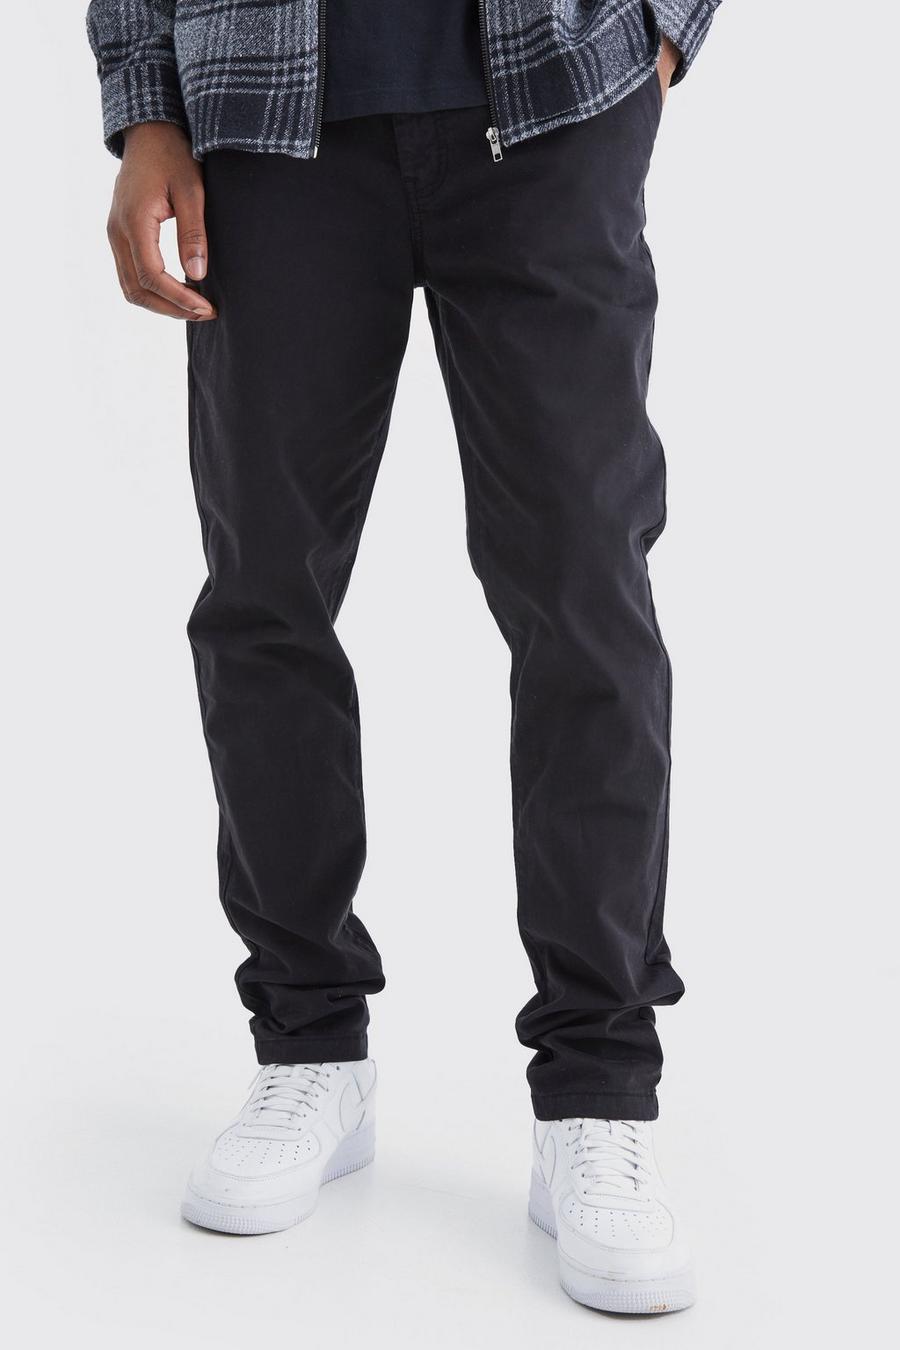 Black Tall Slim Chino Trouser With Woven Tab